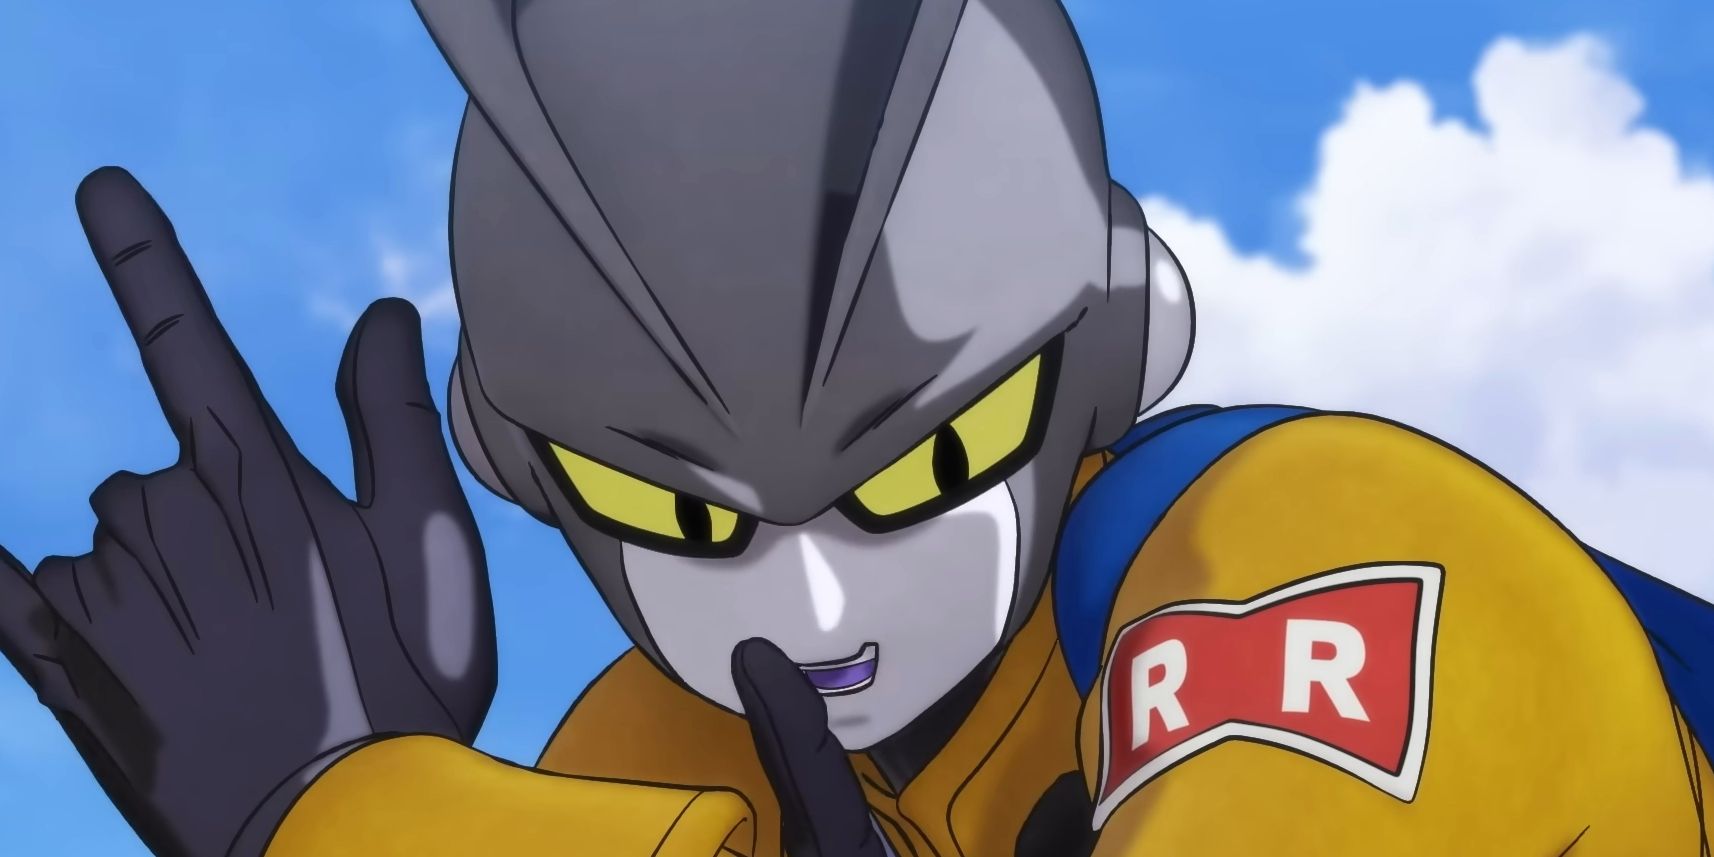 Dragon Ball Super: Why Super Hero's Animation Style Is So Divisive